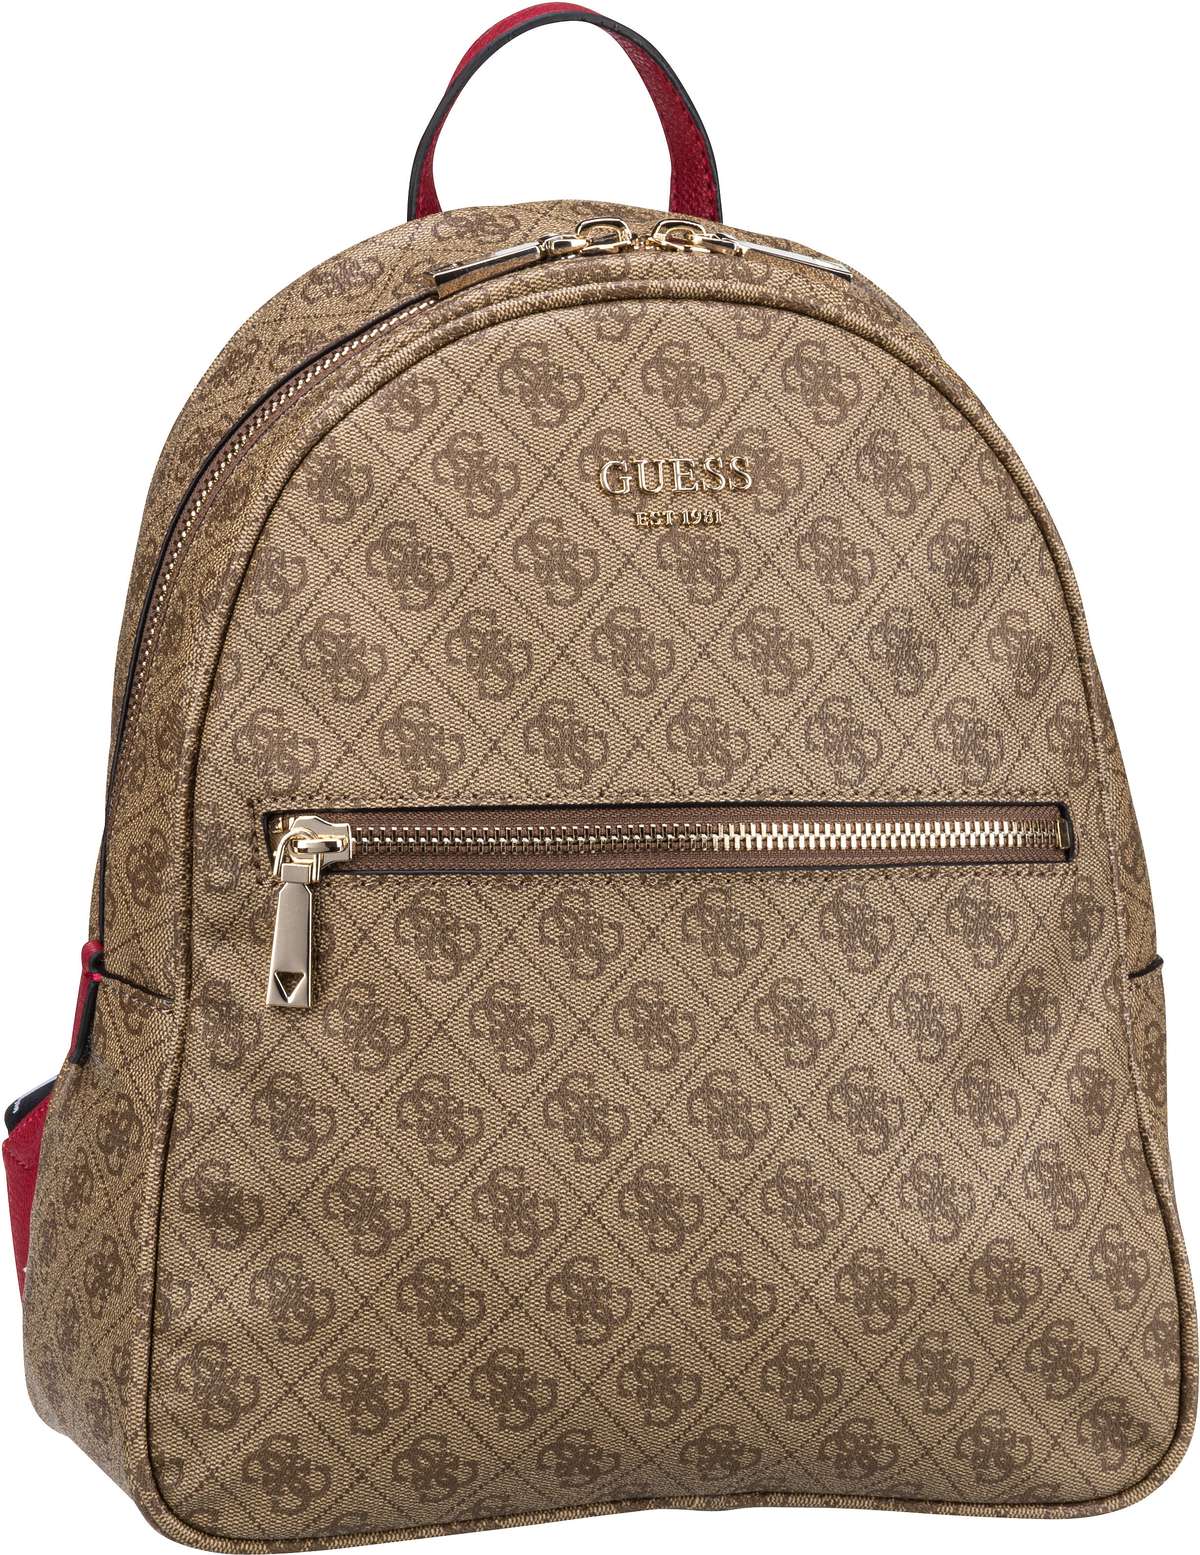 Guess Guess Vikky Backpack Logo in Braun (14.8 Liter), Rucksack / Backpack